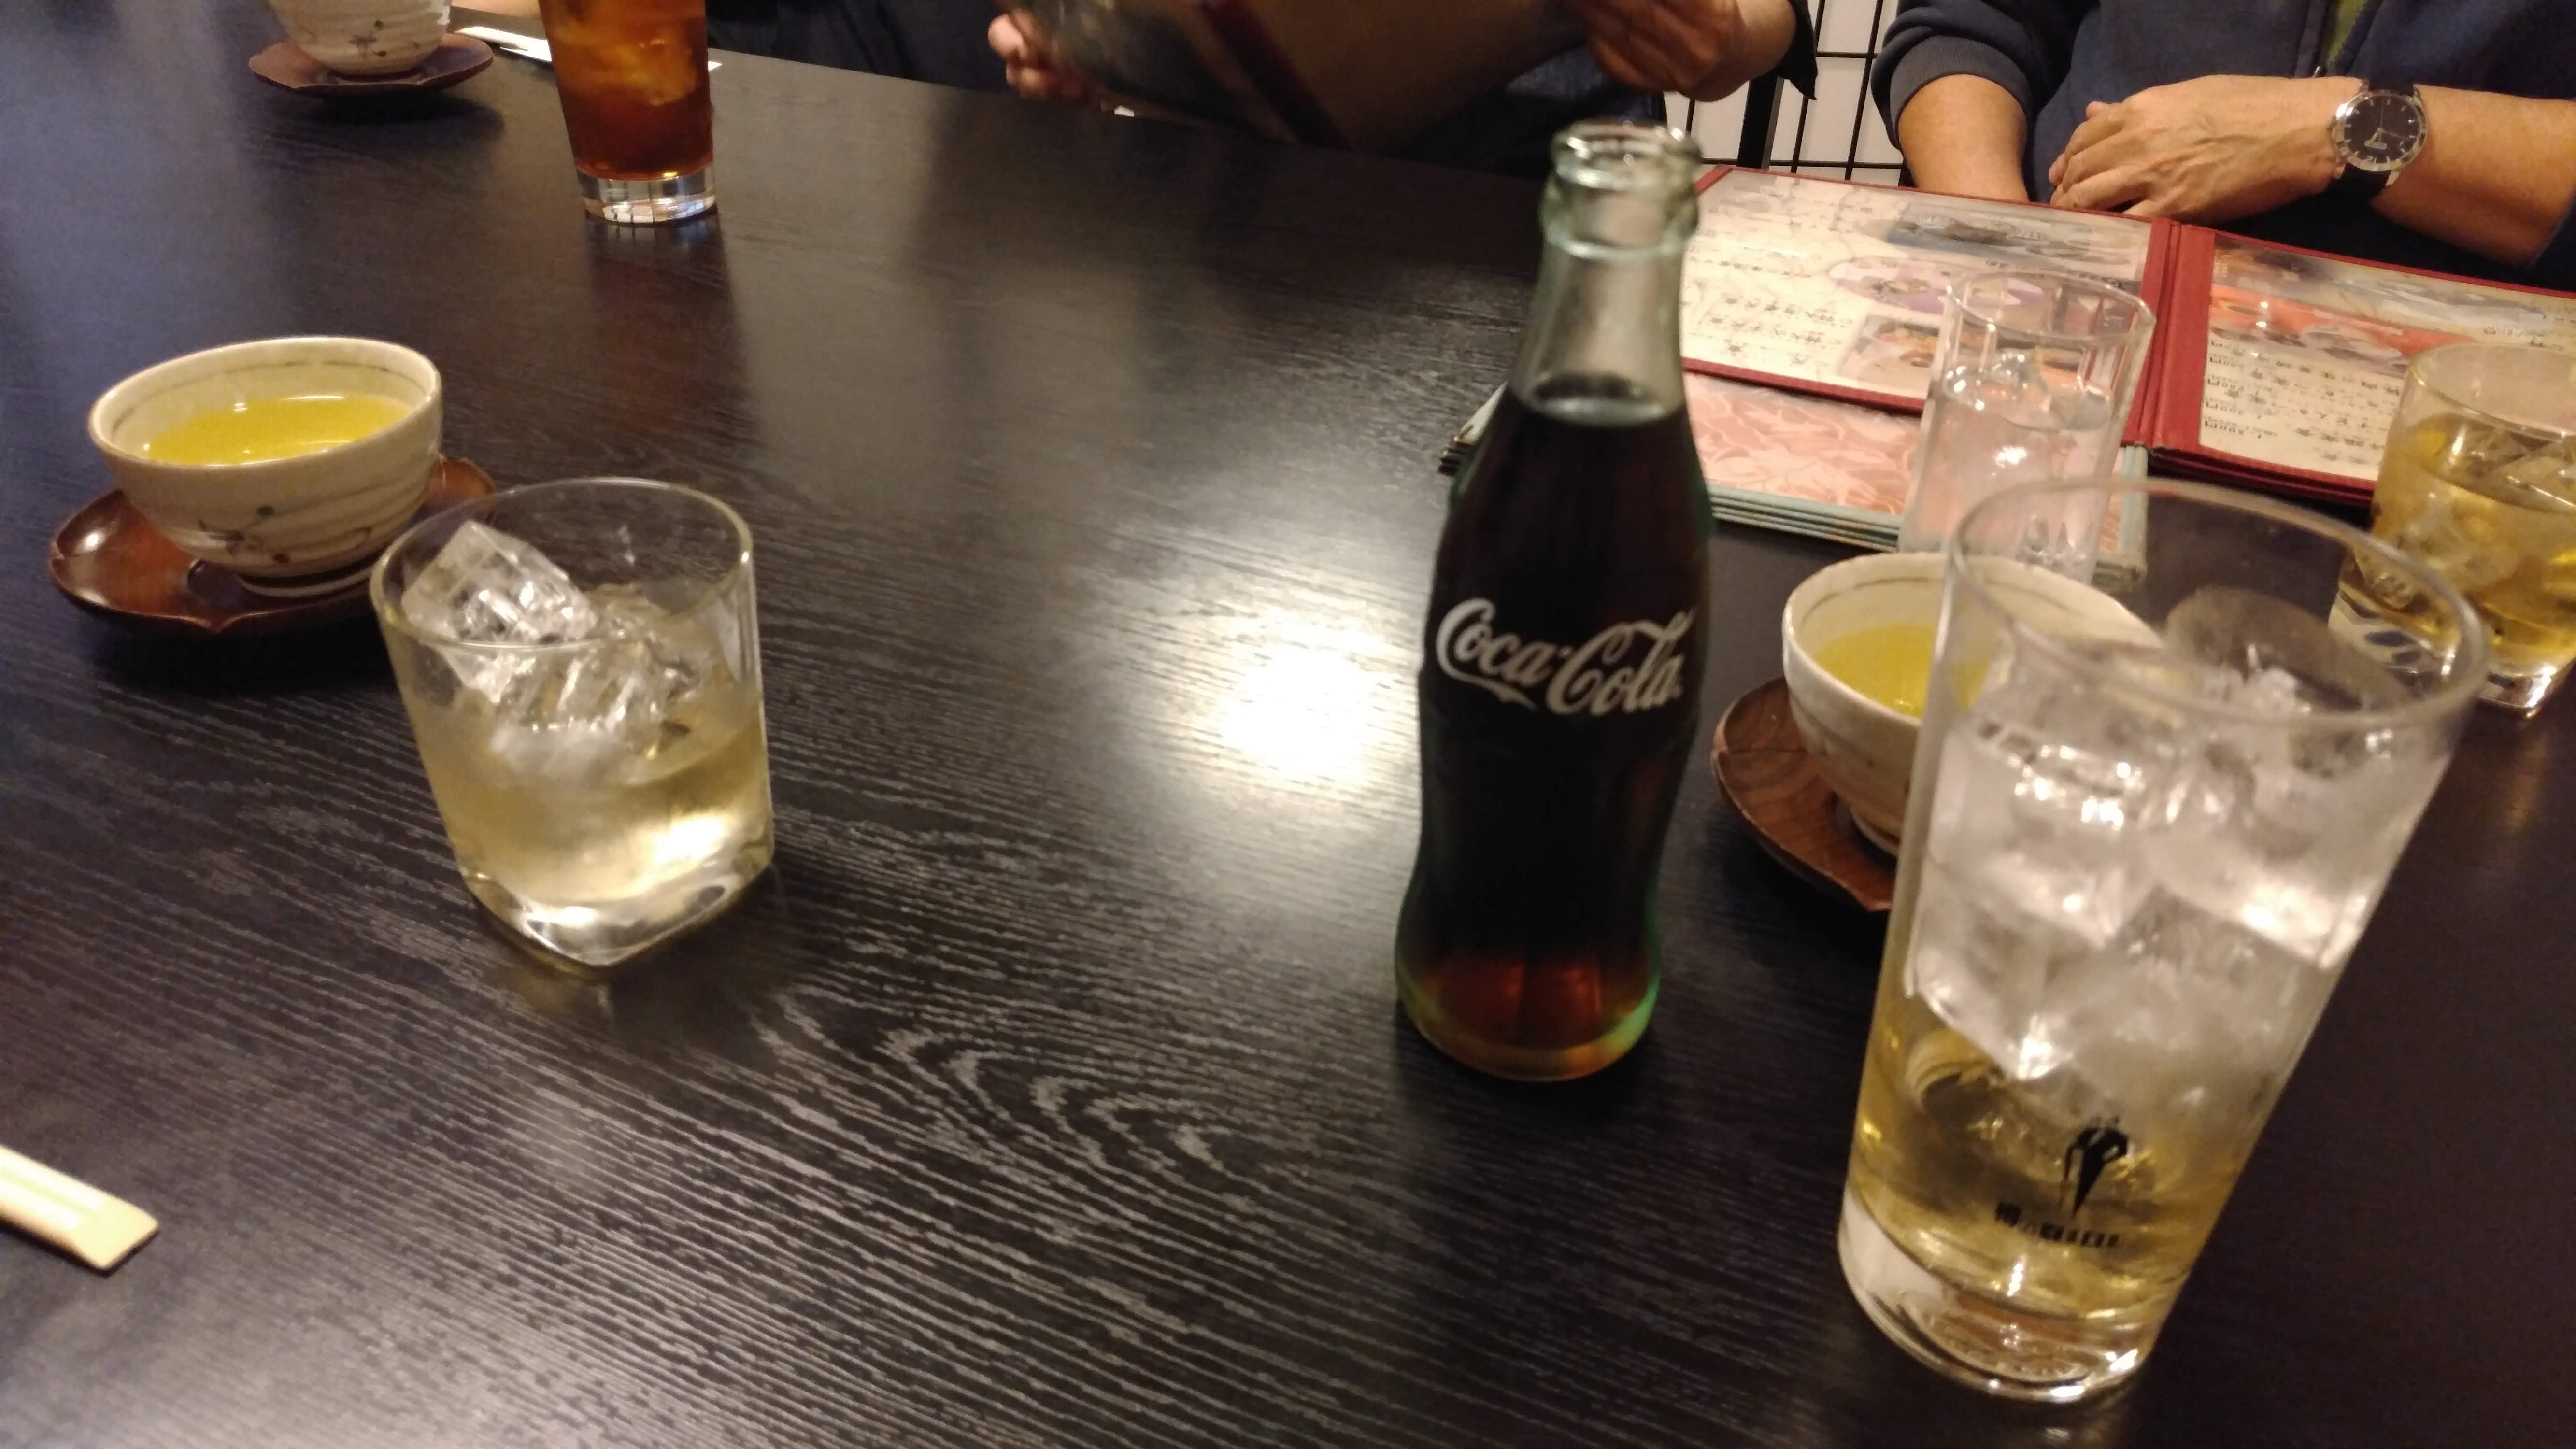 a tall glass, almost half full of spirits next to a glass bottle of coca cola